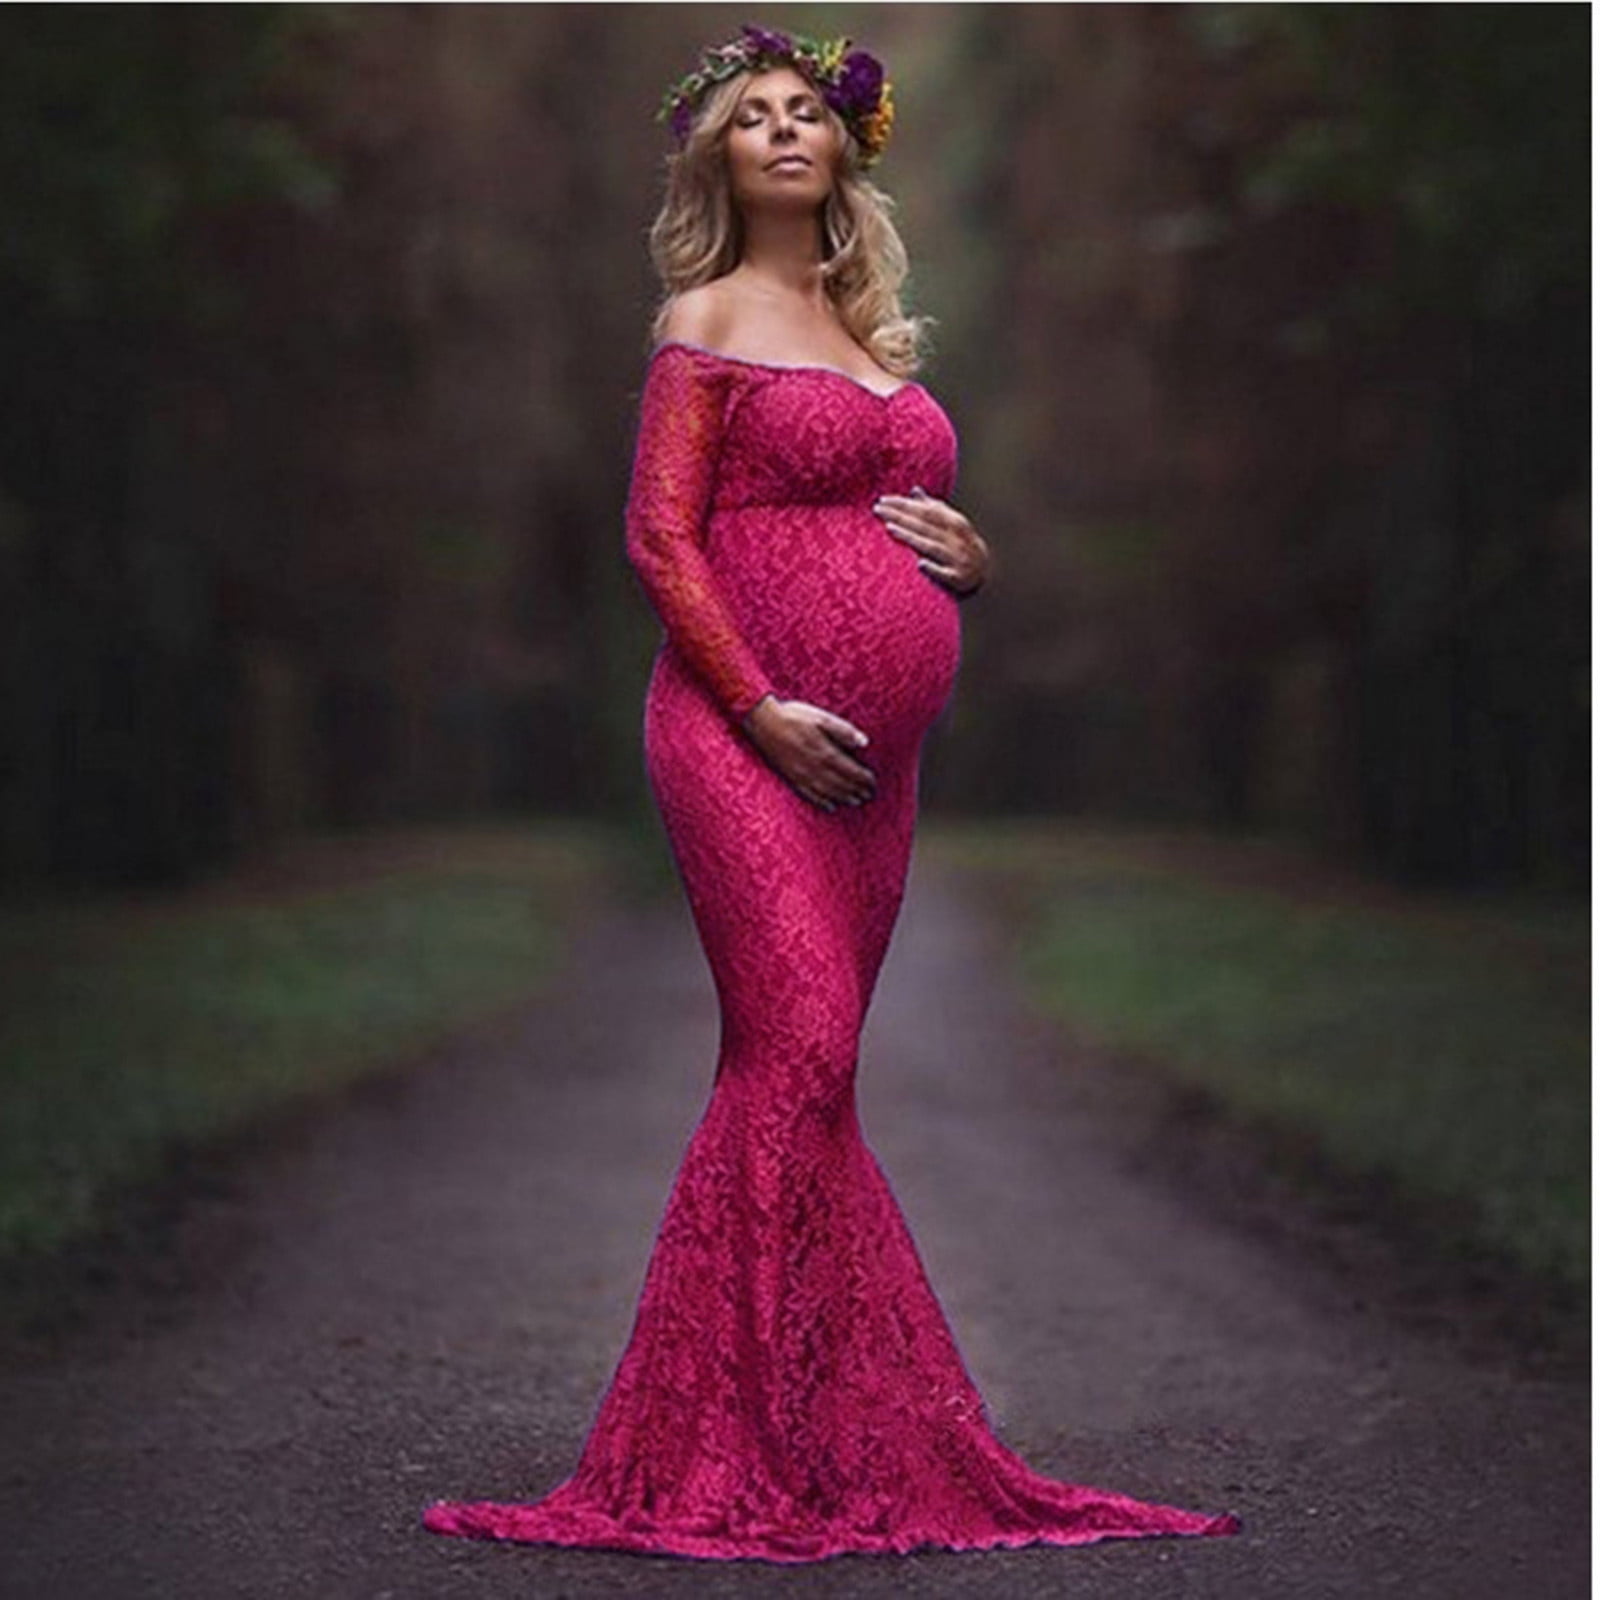 37 Cute Maternity Dresses That Are Truly Perfect for Valentine's Day